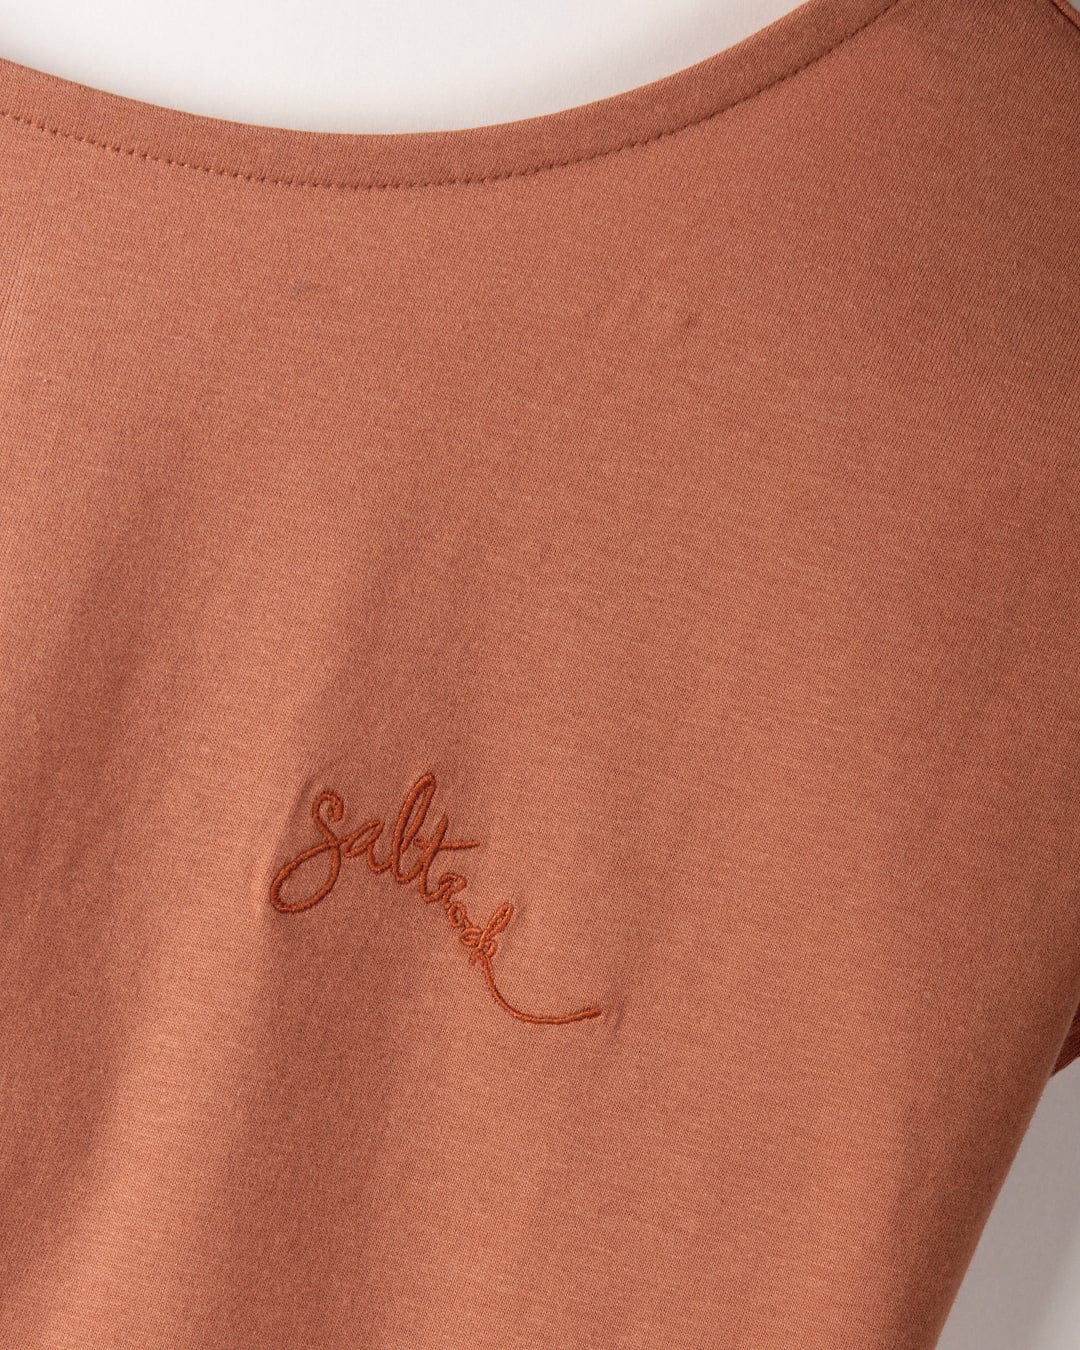 Close-up of a 100% cotton rust-colored shirt with Saltrock embroidered branding on the chest and a stylish dropped back detail. Introducing the "Rhoda - Women's T-Shirt - Brown" by Saltrock.